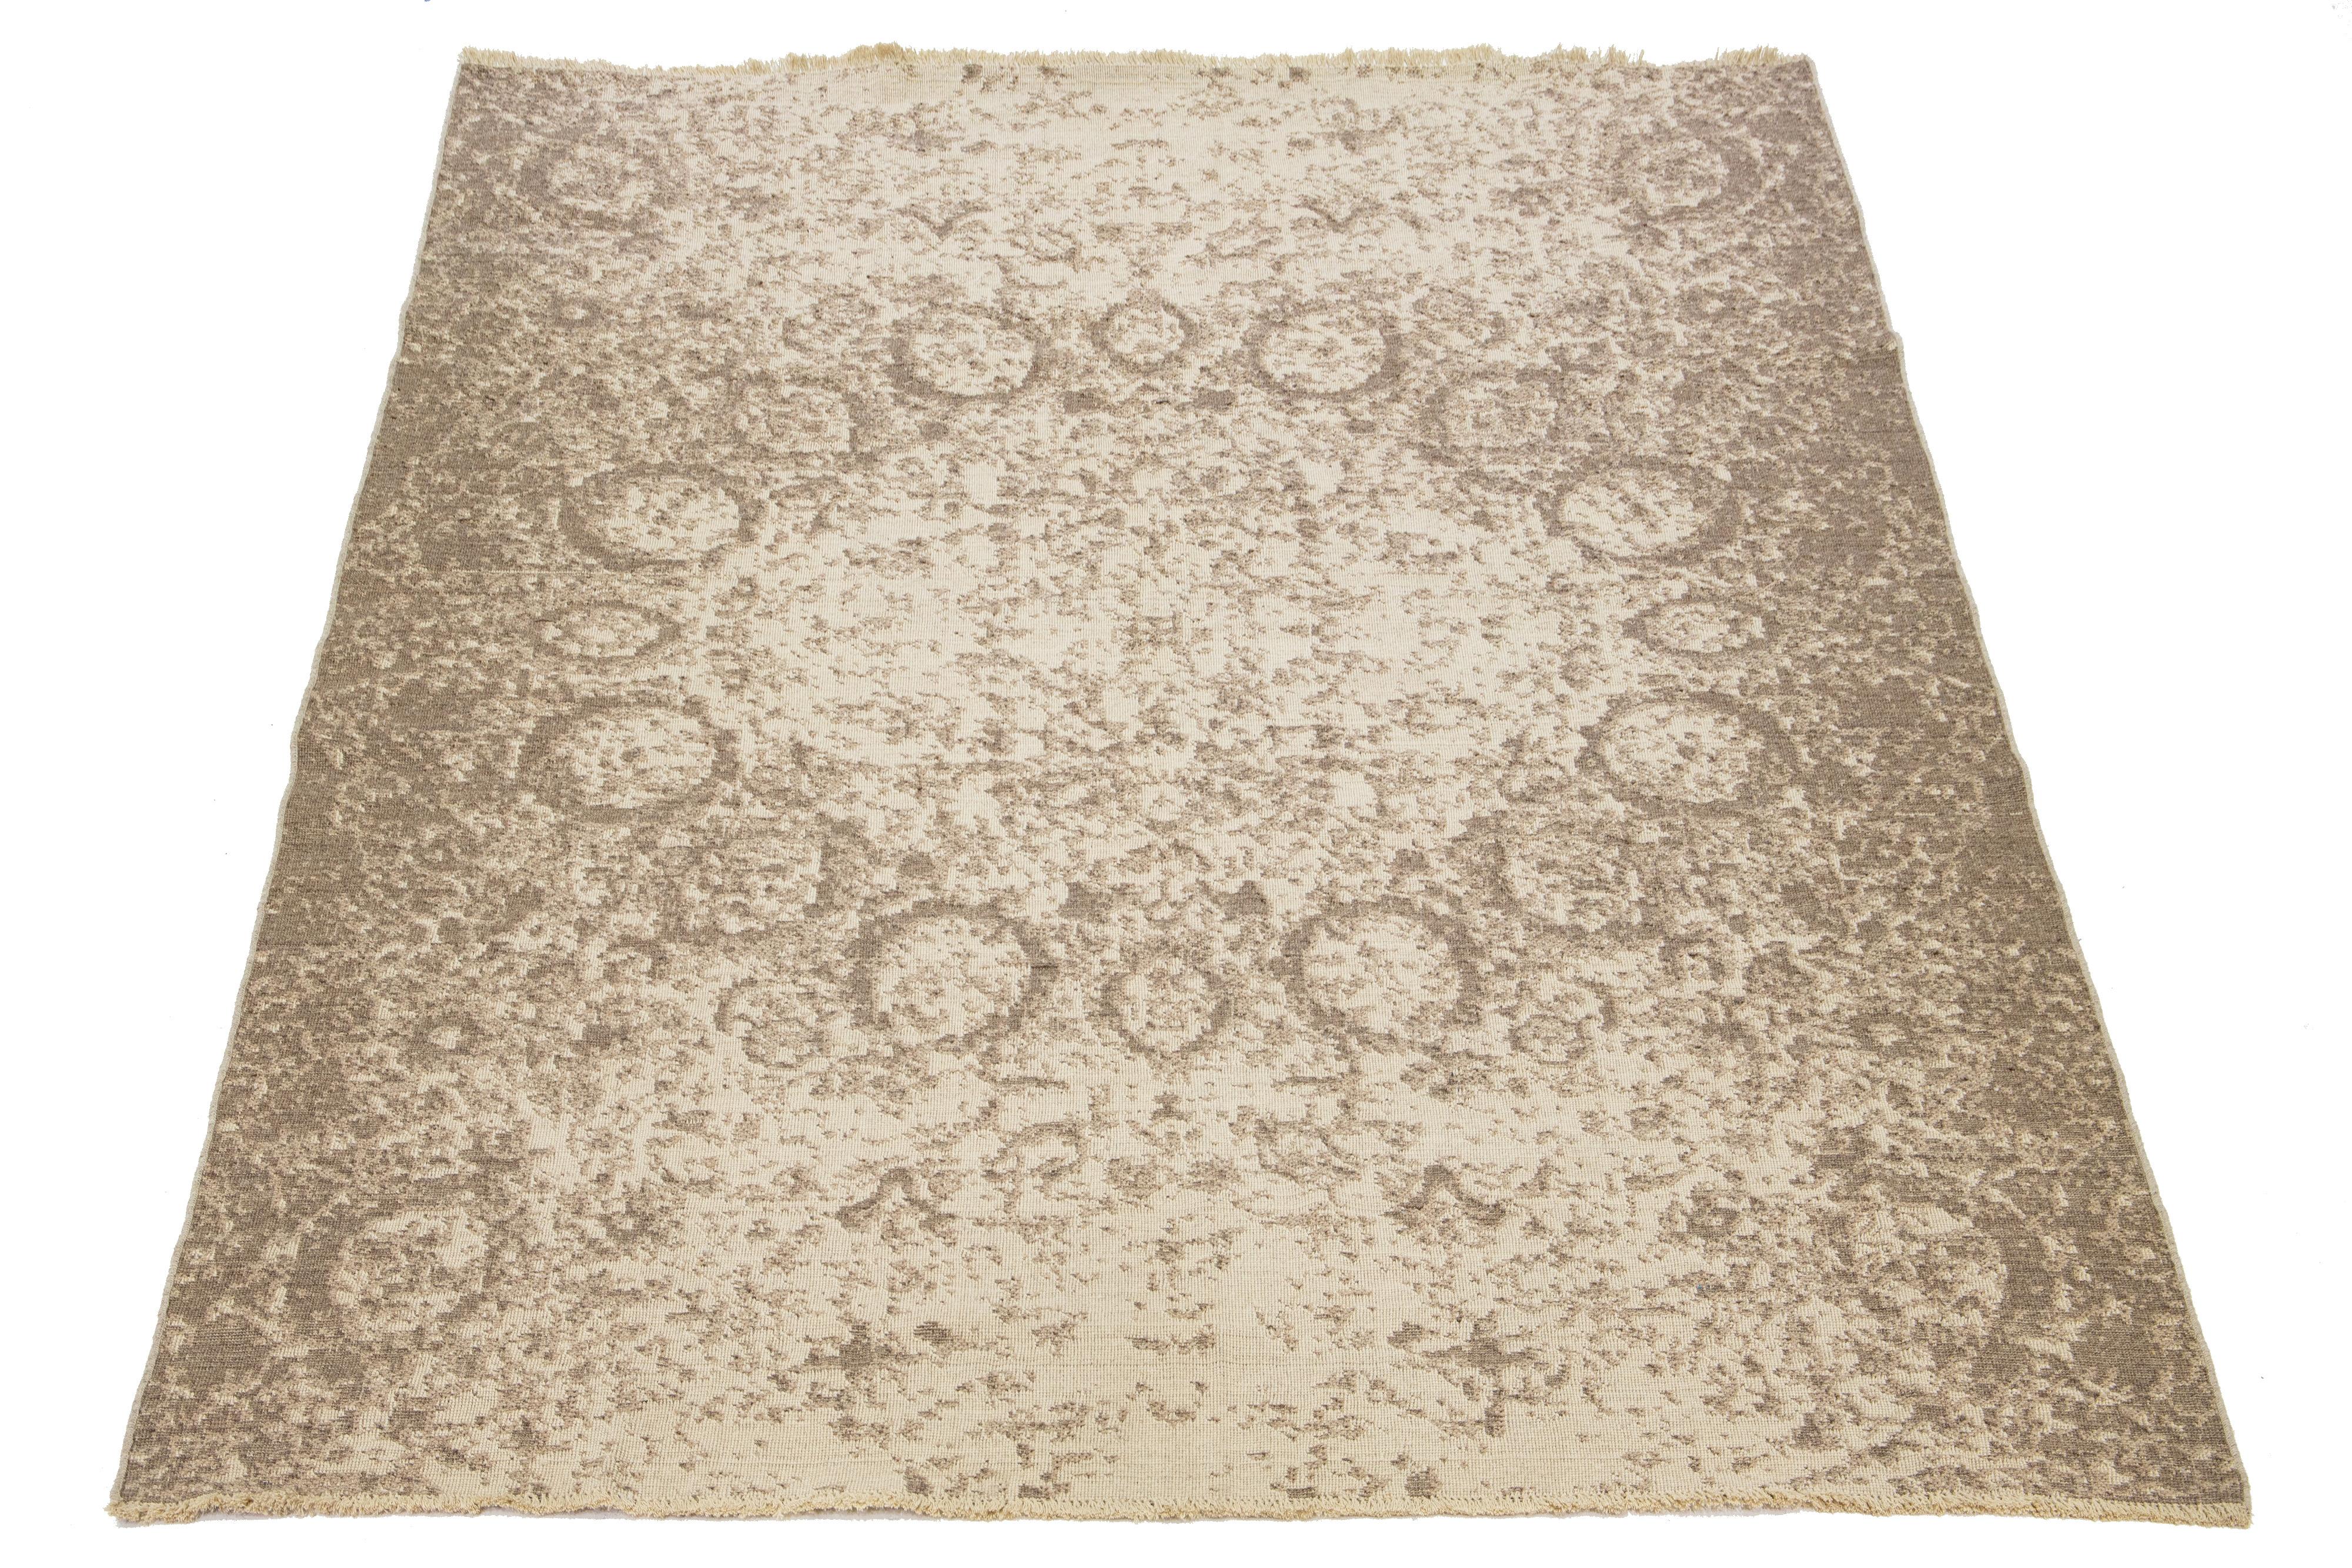 This hand-loomed wool rug boasts a stunning beige background that perfectly complements the striking gray all-over design. It's a must-have for anyone who wants to elevate their home decor game.

This rug measures 9'6